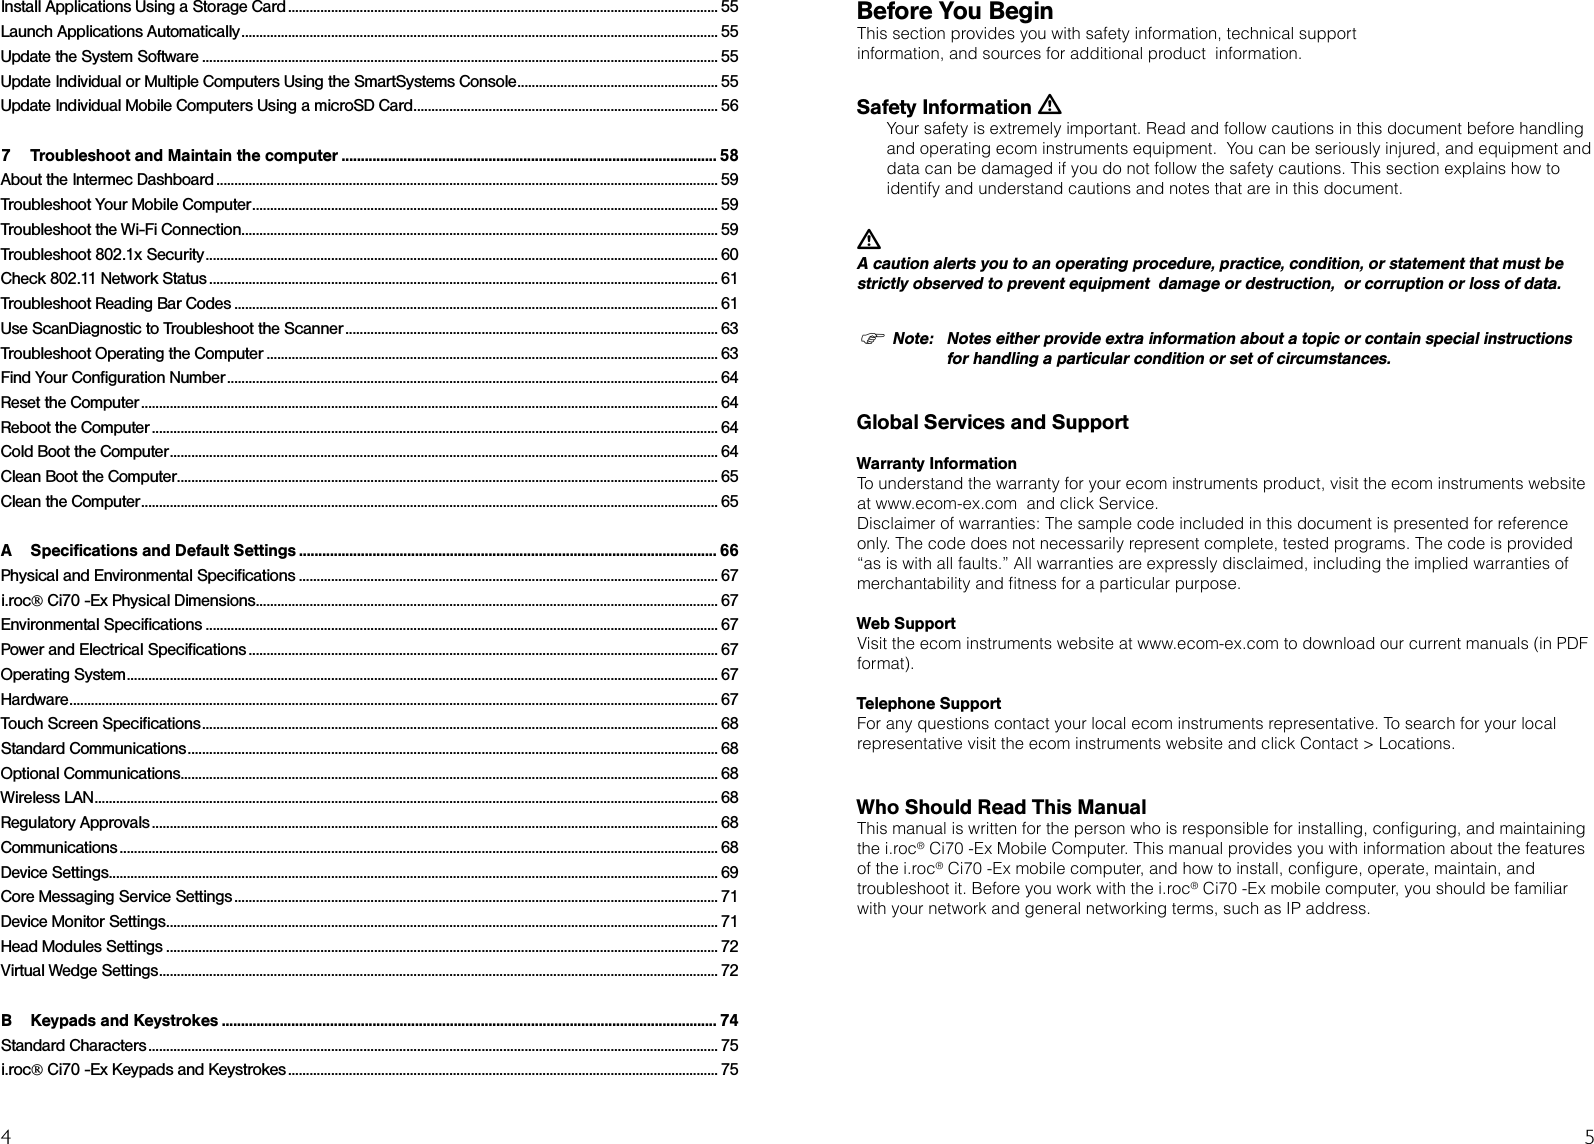 4 5Before You BeginThis section provides you with safety information, technical supportinformation, and sources for additional product  information.Safety Information L Your safety is extremely important. Read and follow cautions in this document before handling  and operating ecom instruments equipment.  You can be seriously injured, and equipment and data can be damaged if you do not follow the safety cautions. This section explains how to identify and understand cautions and notes that are in this document.L A caution alerts you to an operating procedure, practice, condition, or statement that must be strictly observed to prevent equipment  damage or destruction,  or corruption or loss of data�Note:  Notes either provide extra information about a topic or contain special instructions      for handling a particular condition or set of circumstances�Global Services and SupportWarranty InformationTo understand the warranty for your ecom instruments product, visit the ecom instruments website at www.ecom-ex.com  and click Service.Disclaimer of warranties: The sample code included in this document is presented for reference only. The code does not necessarily represent complete, tested programs. The code is provided “as is with all faults.” All warranties are expressly disclaimed, including the implied warranties of merchantability and tness for a particular purpose.Web SupportVisit the ecom instruments website at www.ecom-ex.com to download our current manuals (in PDF format).Telephone SupportFor any questions contact your local ecom instruments representative. To search for your local representative visit the ecom instruments website and click Contact &gt; Locations.Who Should Read This ManualThis manual is written for the person who is responsible for installing, conguring, and maintaining the i.roc® Ci70 -Ex Mobile Computer. This manual provides you with information about the features of the i.roc® Ci70 -Ex mobile computer, and how to install, congure, operate, maintain, and troubleshoot it. Before you work with the i.roc® Ci70 -Ex mobile computer, you should be familiar with your network and general networking terms, such as IP address.Install Applications Using a Storage Card ������������������������������������������������������������������������������������������������������������������������ 55Launch Applications Automatically ������������������������������������������������������������������������������������������������������������������������������������� 55Update the System Software ������������������������������������������������������������������������������������������������������������������������������������������������ 55Update Individual or Multiple Computers Using the SmartSystems Console �������������������������������������������������������� 55Update Individual Mobile Computers Using a microSD Card ������������������������������������������������������������������������������������� 567  Troubleshoot and Maintain the computer ������������������������������������������������������������������������������������������������� 58About the Intermec Dashboard �������������������������������������������������������������������������������������������������������������������������������������������� 59Troubleshoot Your Mobile Computer ���������������������������������������������������������������������������������������������������������������������������������� 59Troubleshoot the Wi-Fi Connection������������������������������������������������������������������������������������������������������������������������������������� 59Troubleshoot 802�1x Security ����������������������������������������������������������������������������������������������������������������������������������������������� 60Check 802�11 Network Status ���������������������������������������������������������������������������������������������������������������������������������������������� 61Troubleshoot Reading Bar Codes ��������������������������������������������������������������������������������������������������������������������������������������� 61Use ScanDiagnostic to Troubleshoot the Scanner �������������������������������������������������������������������������������������������������������� 63Troubleshoot Operating the Computer ������������������������������������������������������������������������������������������������������������������������������ 63Find Your Configuration Number ����������������������������������������������������������������������������������������������������������������������������������������� 64Reset the Computer ����������������������������������������������������������������������������������������������������������������������������������������������������������������� 64Reboot the Computer �������������������������������������������������������������������������������������������������������������������������������������������������������������� 64Cold Boot the Computer ��������������������������������������������������������������������������������������������������������������������������������������������������������� 64Clean Boot the Computer������������������������������������������������������������������������������������������������������������������������������������������������������� 65Clean the Computer ����������������������������������������������������������������������������������������������������������������������������������������������������������������� 65A  Specifications and Default Settings ������������������������������������������������������������������������������������������������������������ 66Physical and Environmental Specifications ��������������������������������������������������������������������������������������������������������������������� 67i�roc® Ci70 -Ex Physical Dimensions ��������������������������������������������������������������������������������������������������������������������������������� 67Environmental Specifications ����������������������������������������������������������������������������������������������������������������������������������������������� 67Power and Electrical Specifications ����������������������������������������������������������������������������������������������������������������������������������� 67Operating System ��������������������������������������������������������������������������������������������������������������������������������������������������������������������� 67Hardware ������������������������������������������������������������������������������������������������������������������������������������������������������������������������������������� 67Touch Screen Specifications ������������������������������������������������������������������������������������������������������������������������������������������������ 68Standard Communications ���������������������������������������������������������������������������������������������������������������������������������������������������� 68Optional Communications������������������������������������������������������������������������������������������������������������������������������������������������������ 68Wireless LAN ������������������������������������������������������������������������������������������������������������������������������������������������������������������������������ 68Regulatory Approvals �������������������������������������������������������������������������������������������������������������������������������������������������������������� 68Communications ����������������������������������������������������������������������������������������������������������������������������������������������������������������������� 68Device Settings�������������������������������������������������������������������������������������������������������������������������������������������������������������������������� 69Core Messaging Service Settings ��������������������������������������������������������������������������������������������������������������������������������������� 71Device Monitor Settings ���������������������������������������������������������������������������������������������������������������������������������������������������������� 71Head Modules Settings ���������������������������������������������������������������������������������������������������������������������������������������������������������� 72Virtual Wedge Settings ������������������������������������������������������������������������������������������������������������������������������������������������������������ 72B  Keypads and Keystrokes �������������������������������������������������������������������������������������������������������������������������������� 74Standard Characters ��������������������������������������������������������������������������������������������������������������������������������������������������������������� 75i�roc® Ci70 -Ex Keypads and Keystrokes ������������������������������������������������������������������������������������������������������������������������ 75